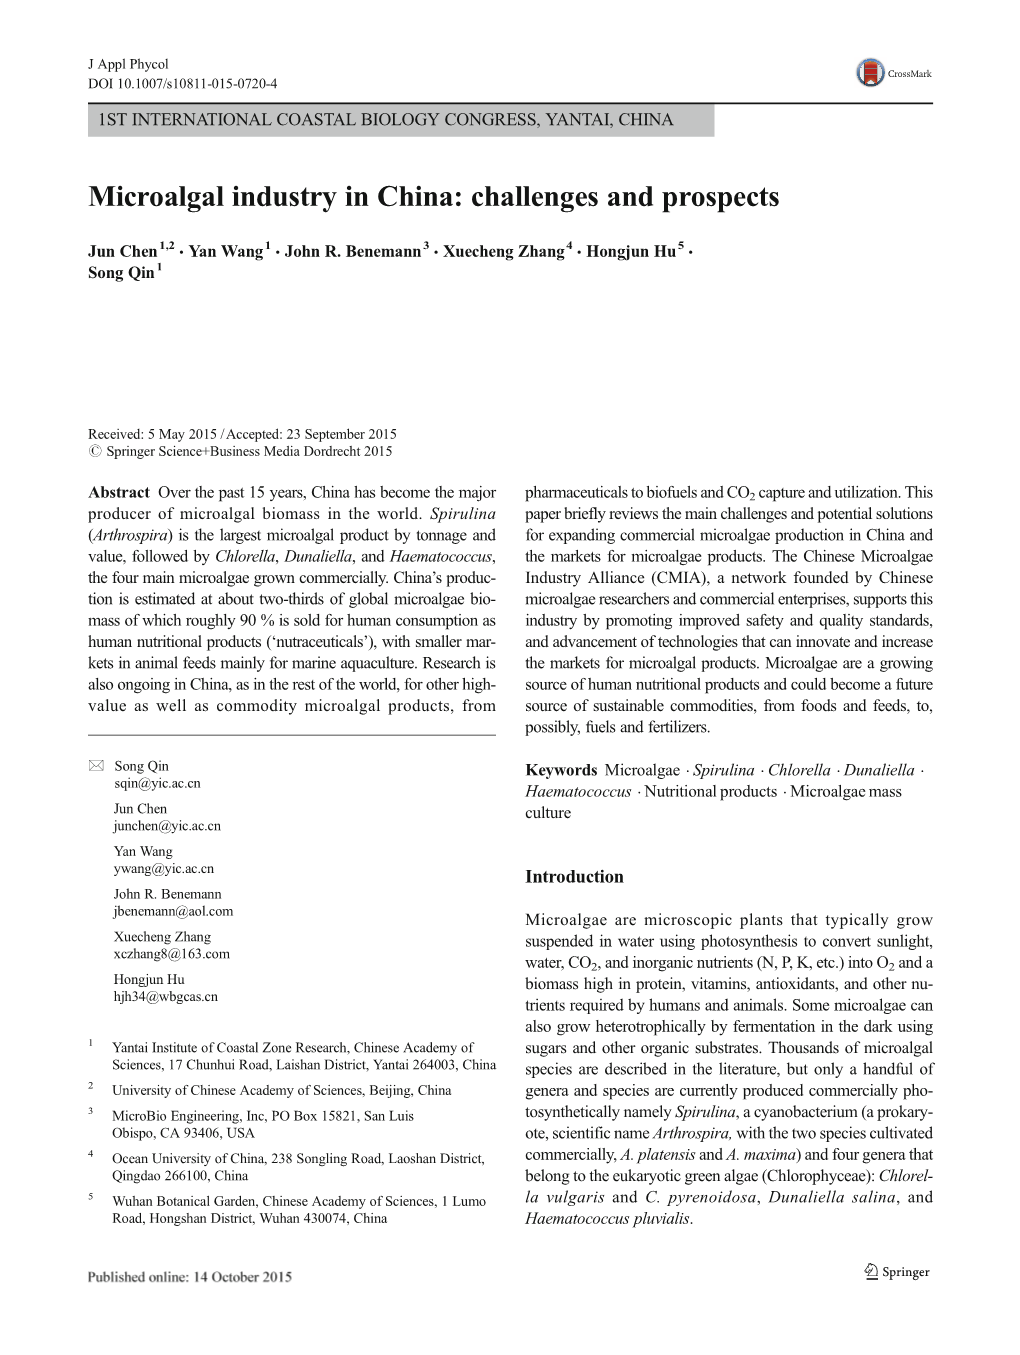 Microalgal Industry in China: Challenges and Prospects